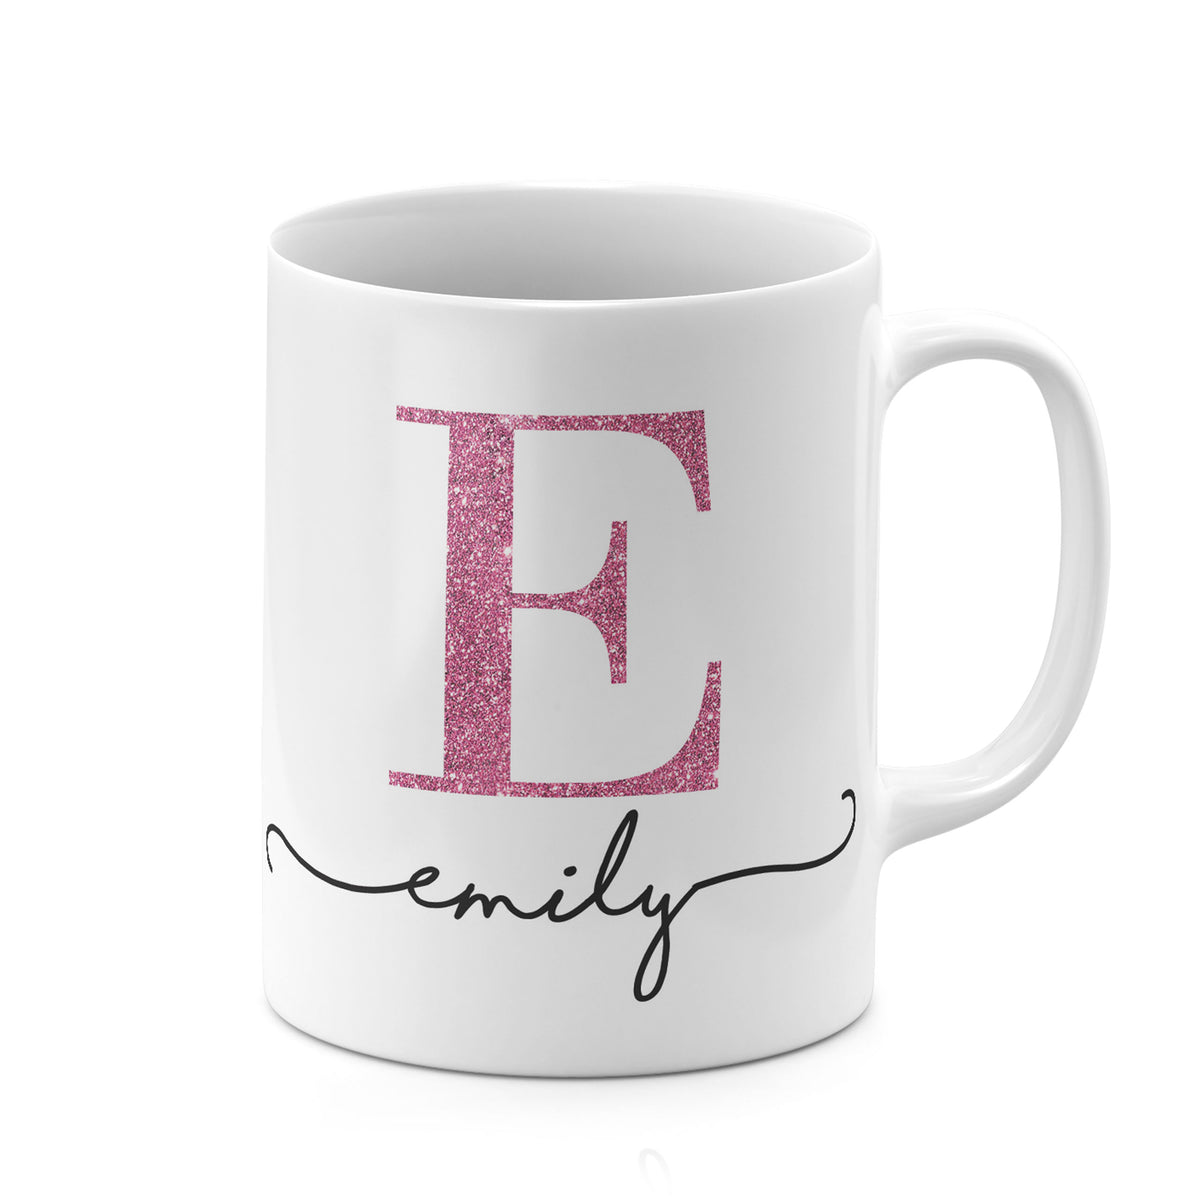 Personalised Ceramic Mug with Name Initials Text Pink Glitter Effect Monogram